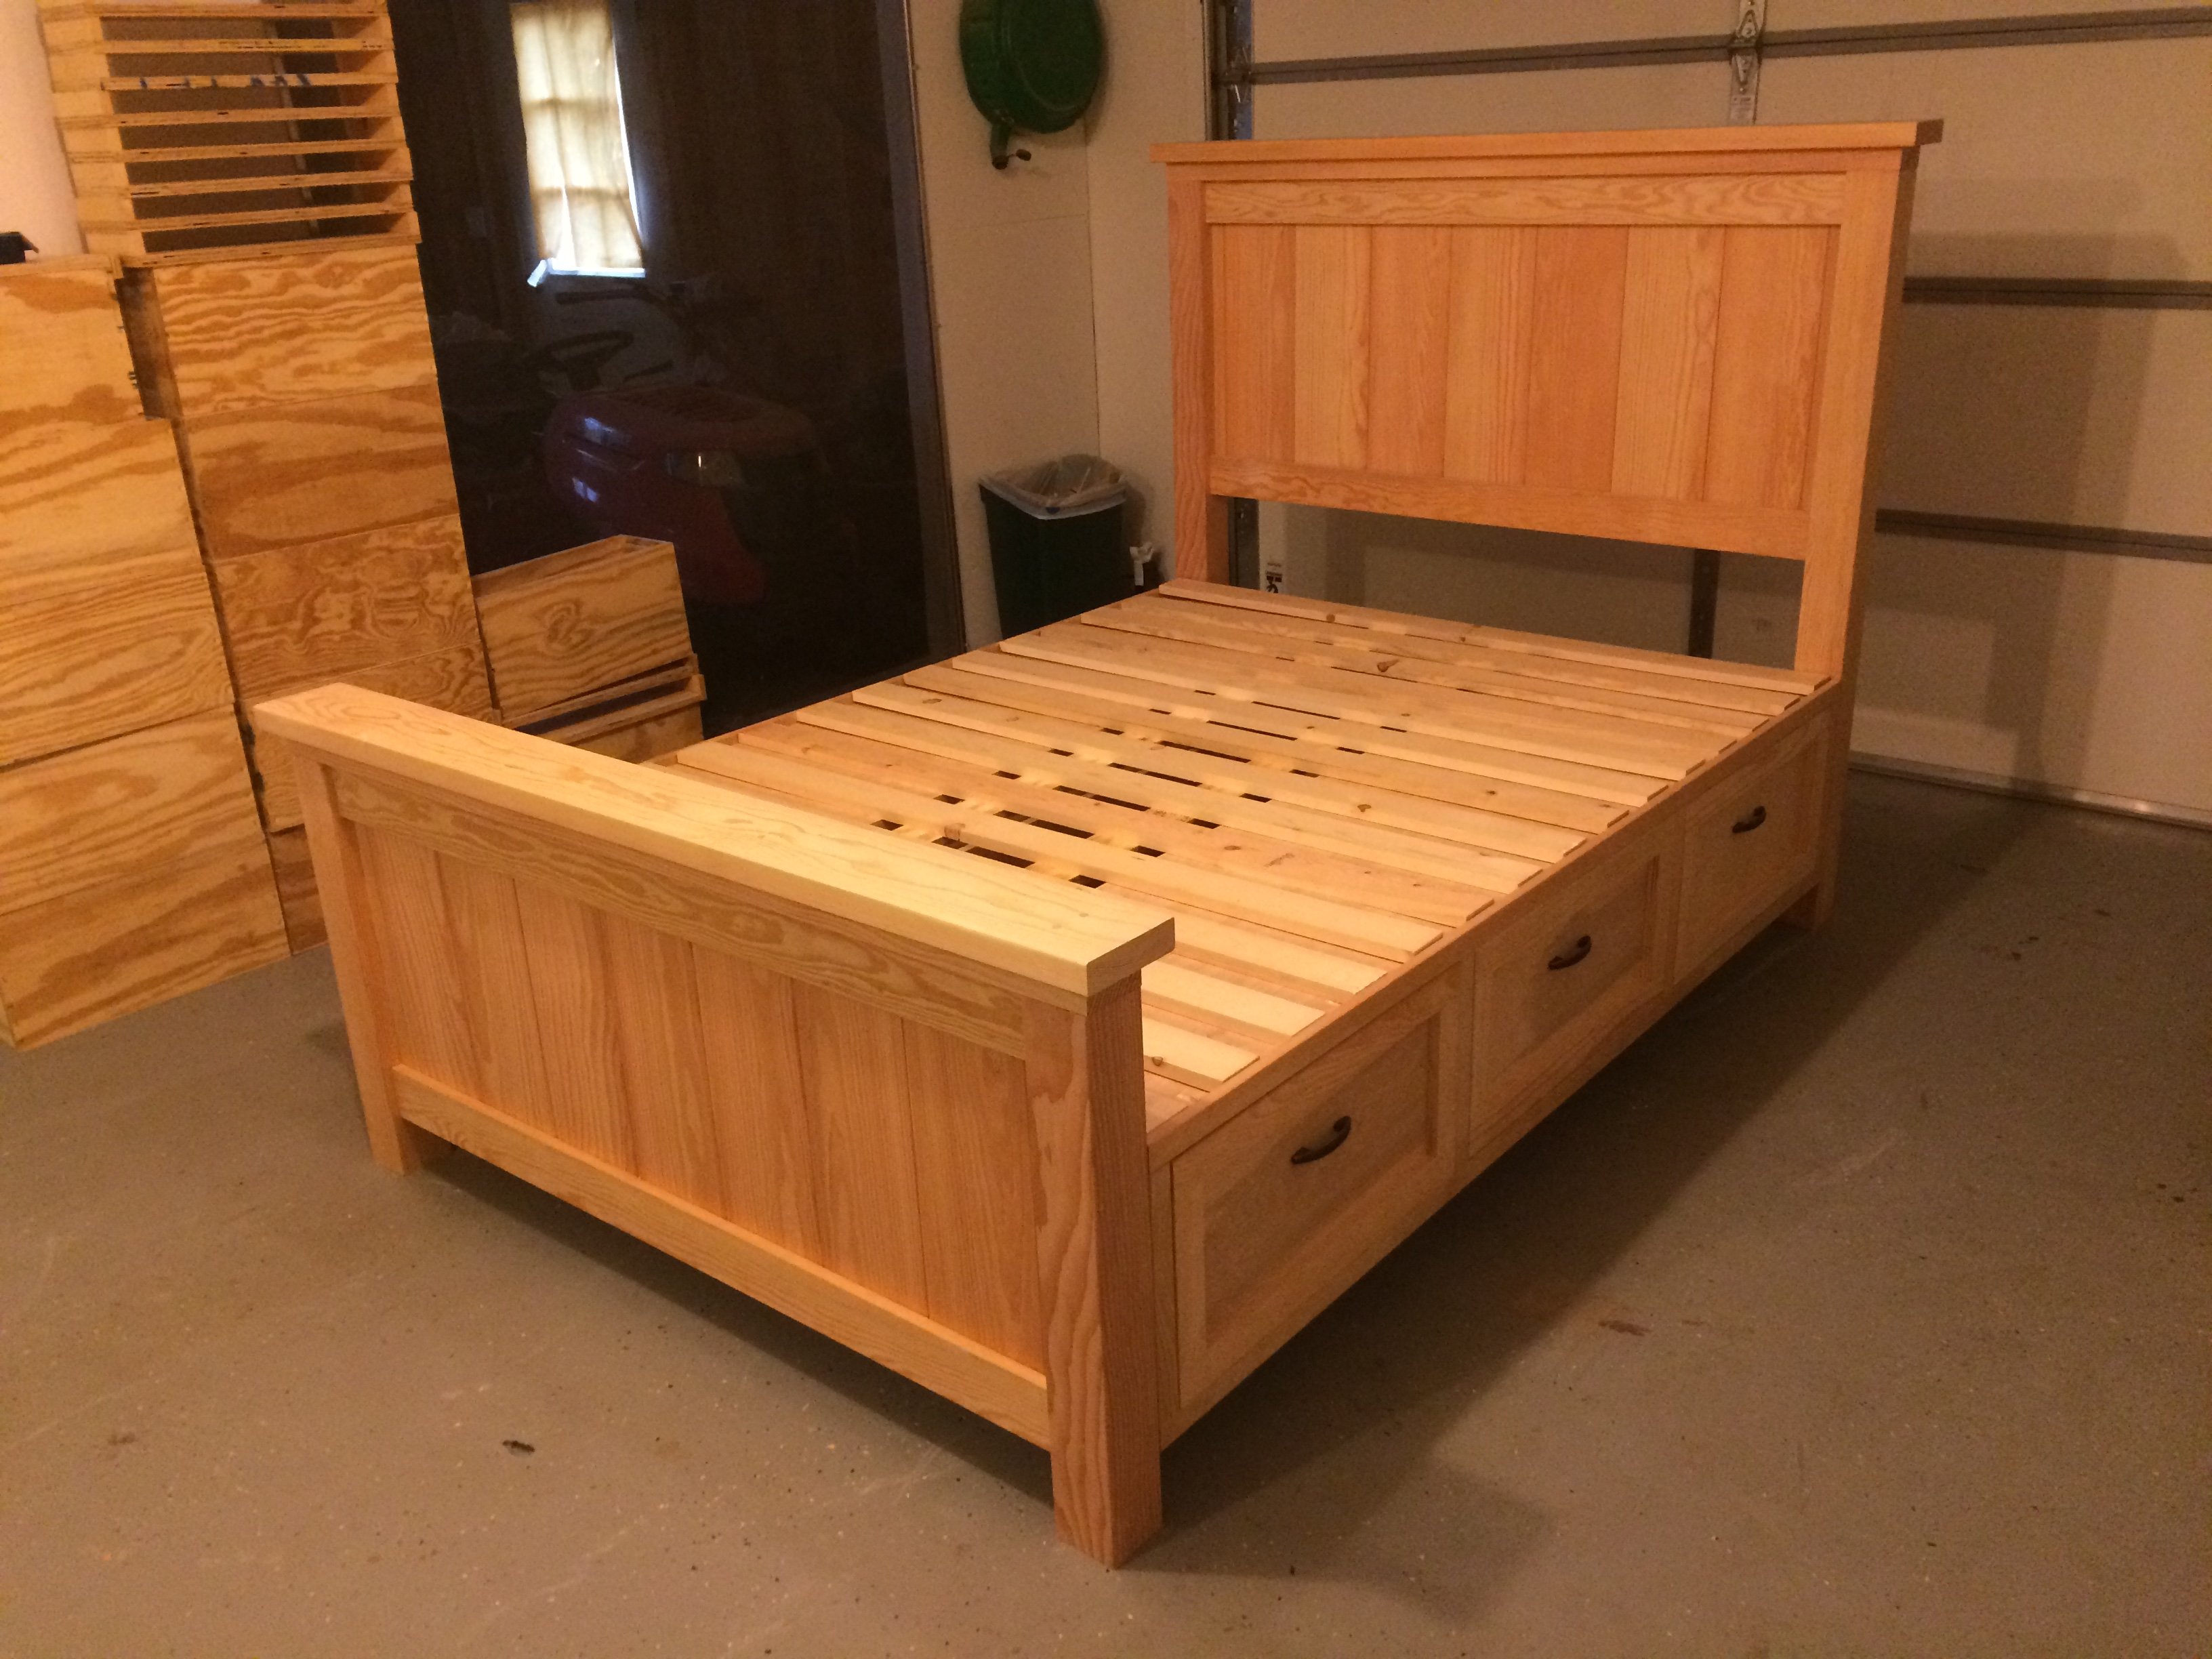 Farmhouse Storage Bed With Drawers, Building A King Size Bed Frame With Storage